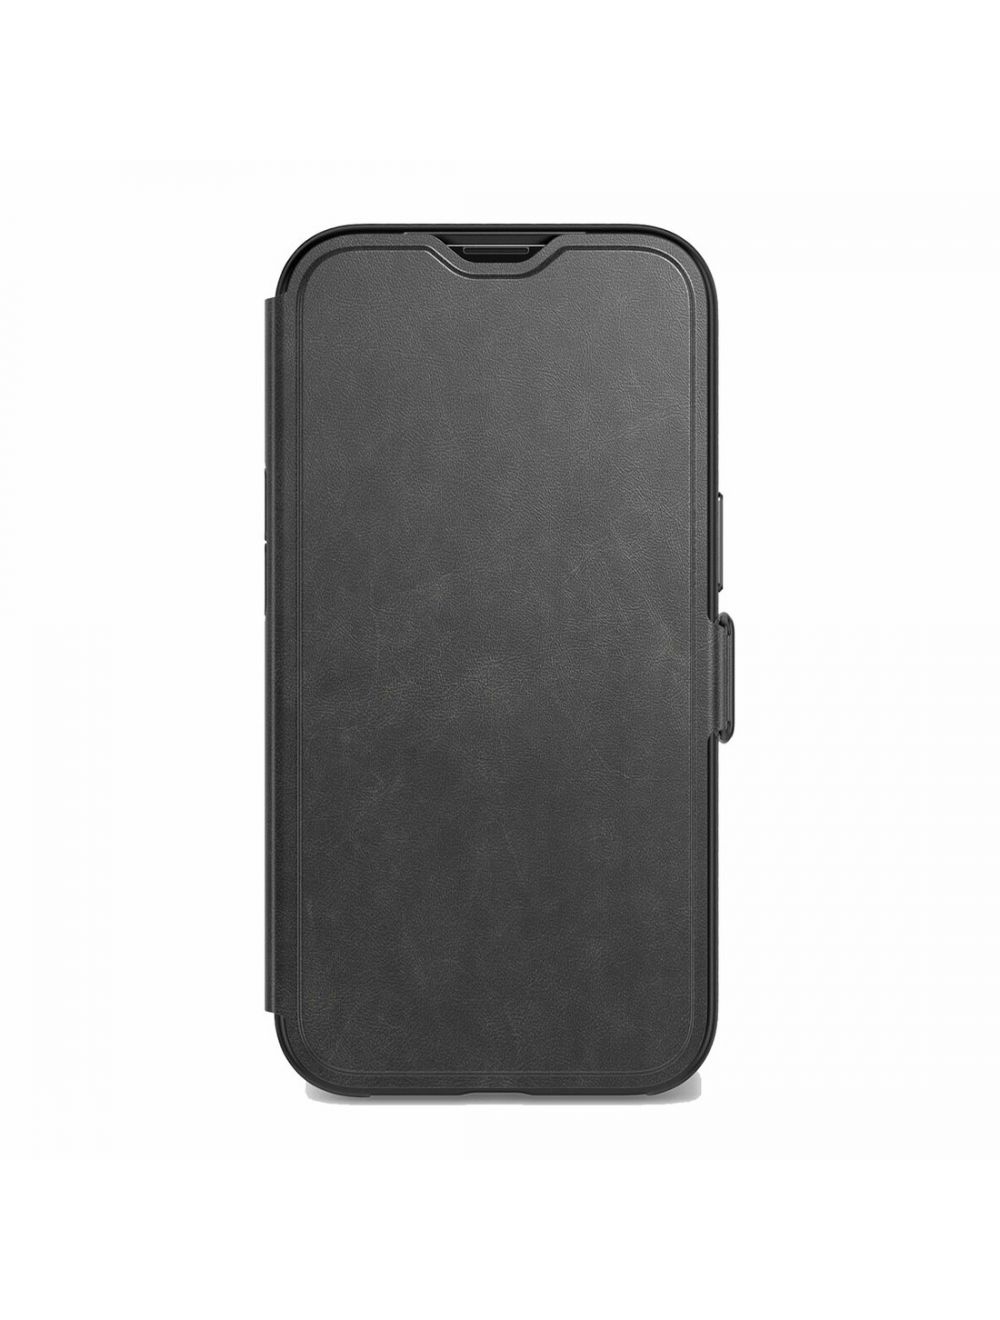 Tech21 EvoWallet card Case cover for iPhone 13 Pro Max - Black